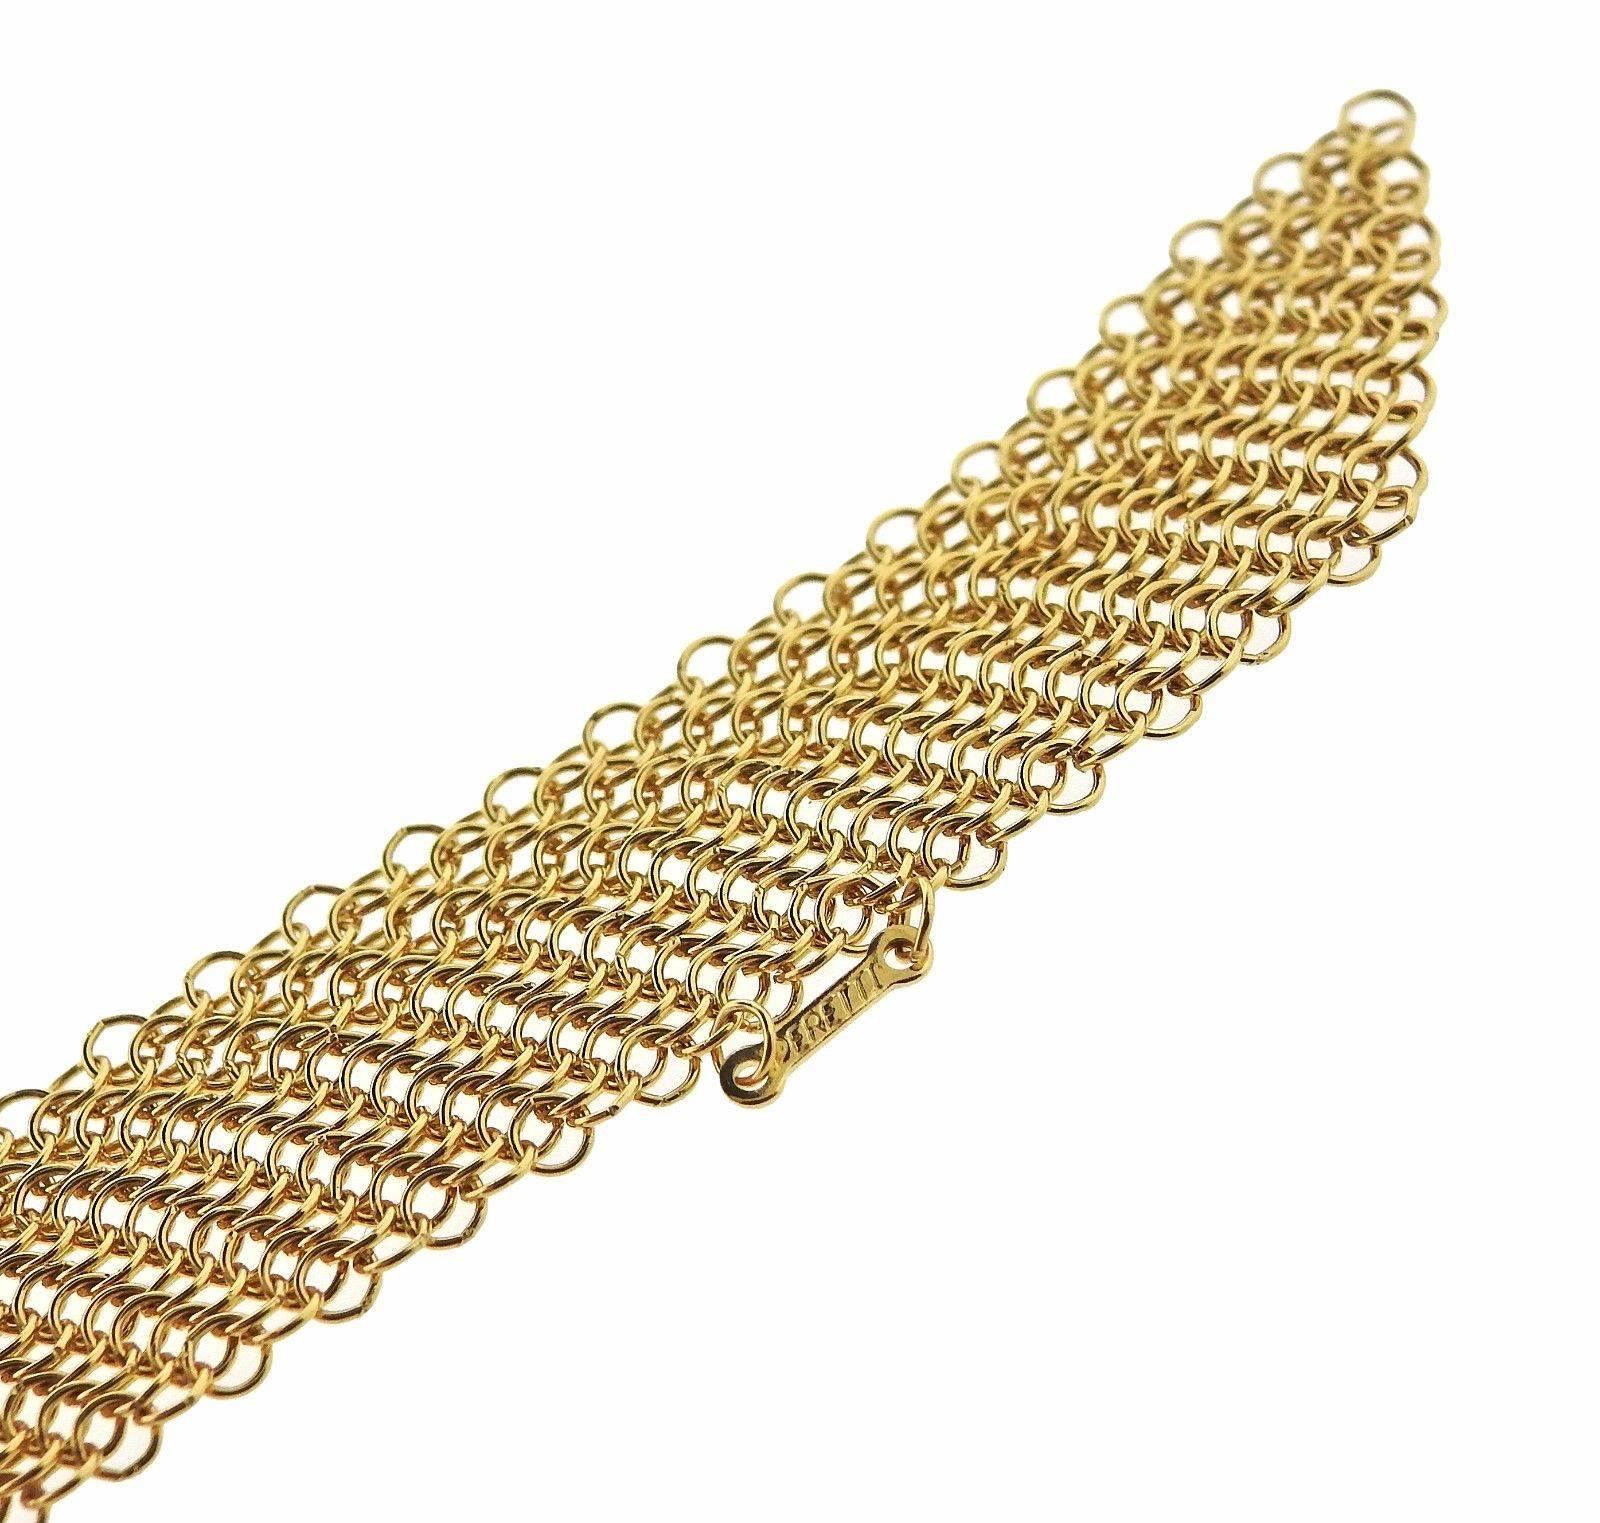 An 18k yellow gold necklace by Elsa Peretti for Tiffany & Co.  The necklace is 31" long and 16mm wide.  The weight of the piece is 63.6 grams.  Marked: Peretti, T & Co, 750.